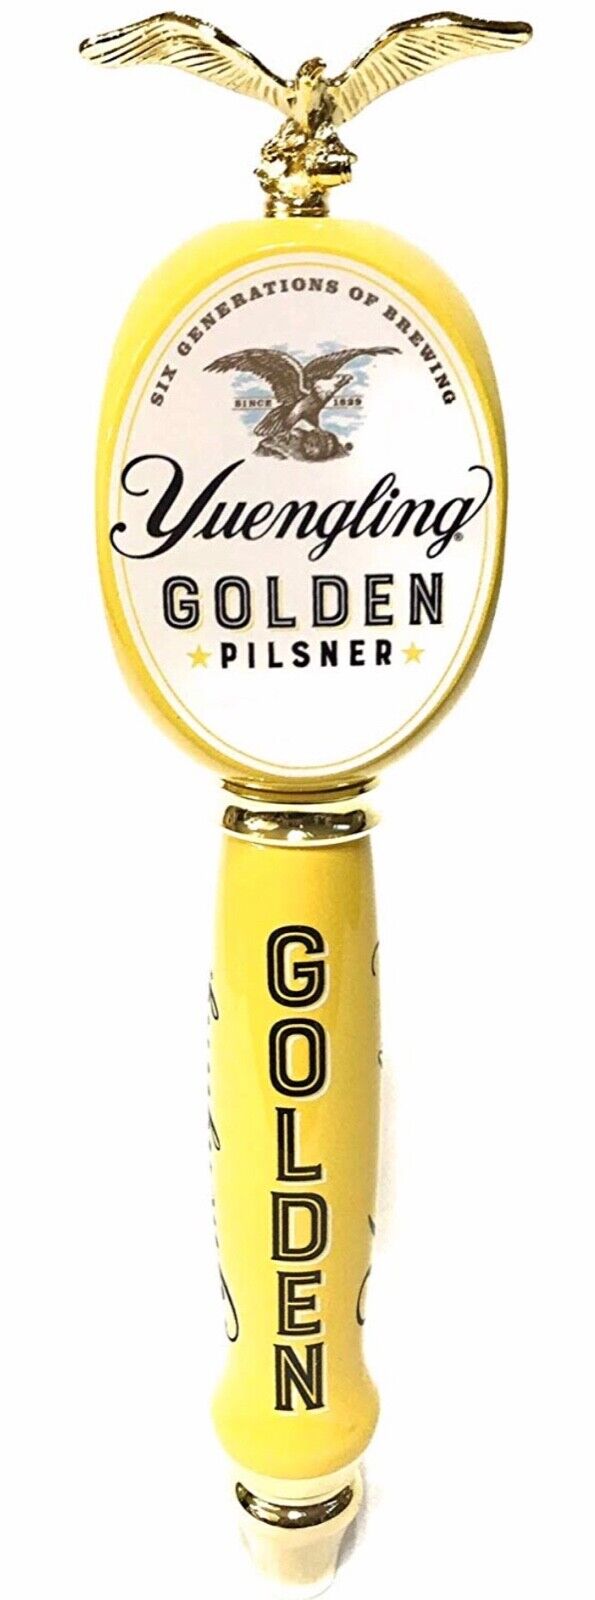 Yuengling Golden Pilsner 3D Eagle Topper Tap Handle - New in Box & 